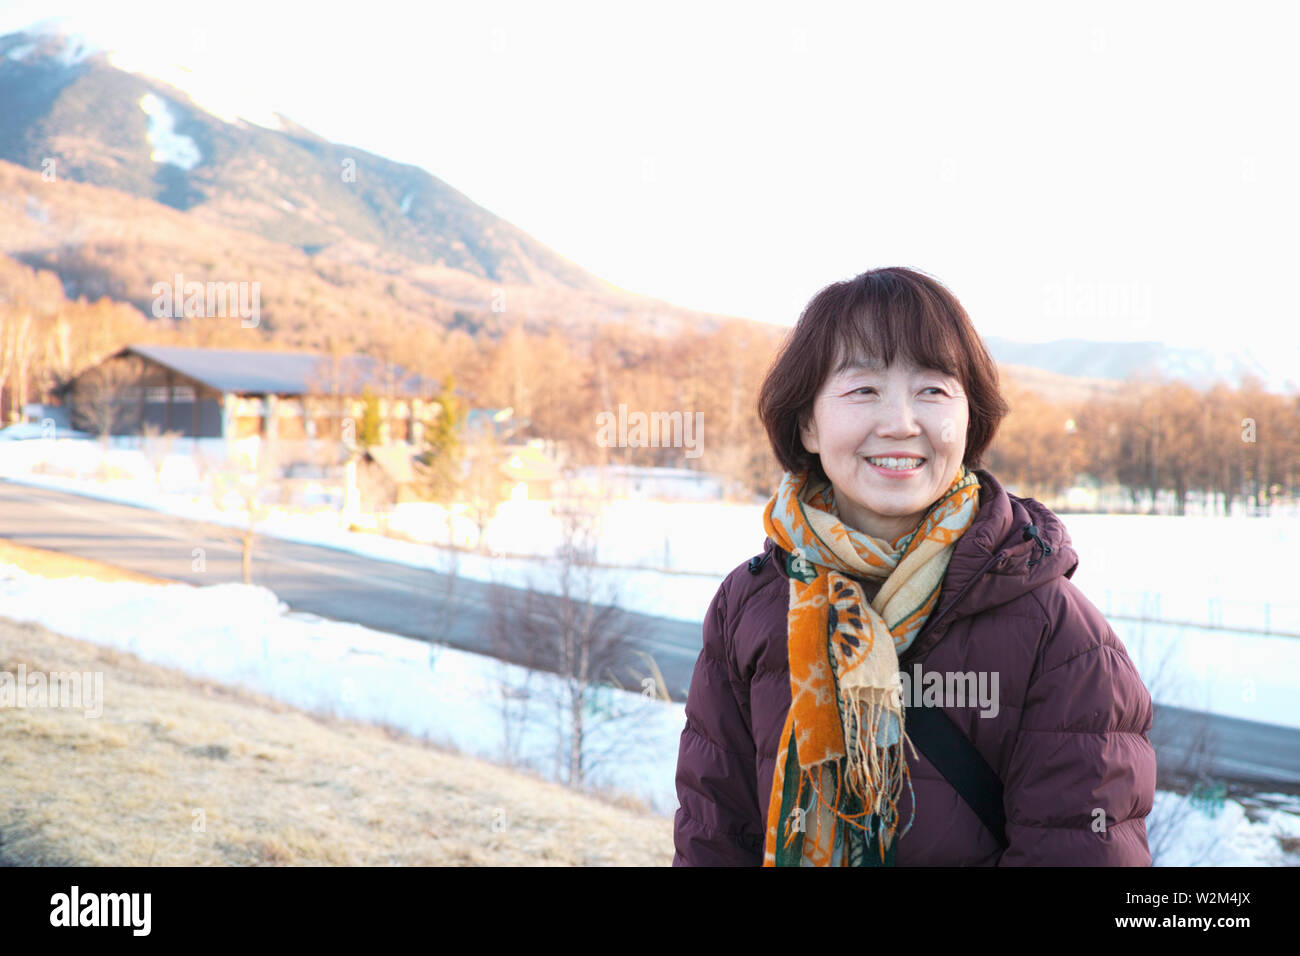 An older lady smiling while looking at the Winter scenery Stock Photo